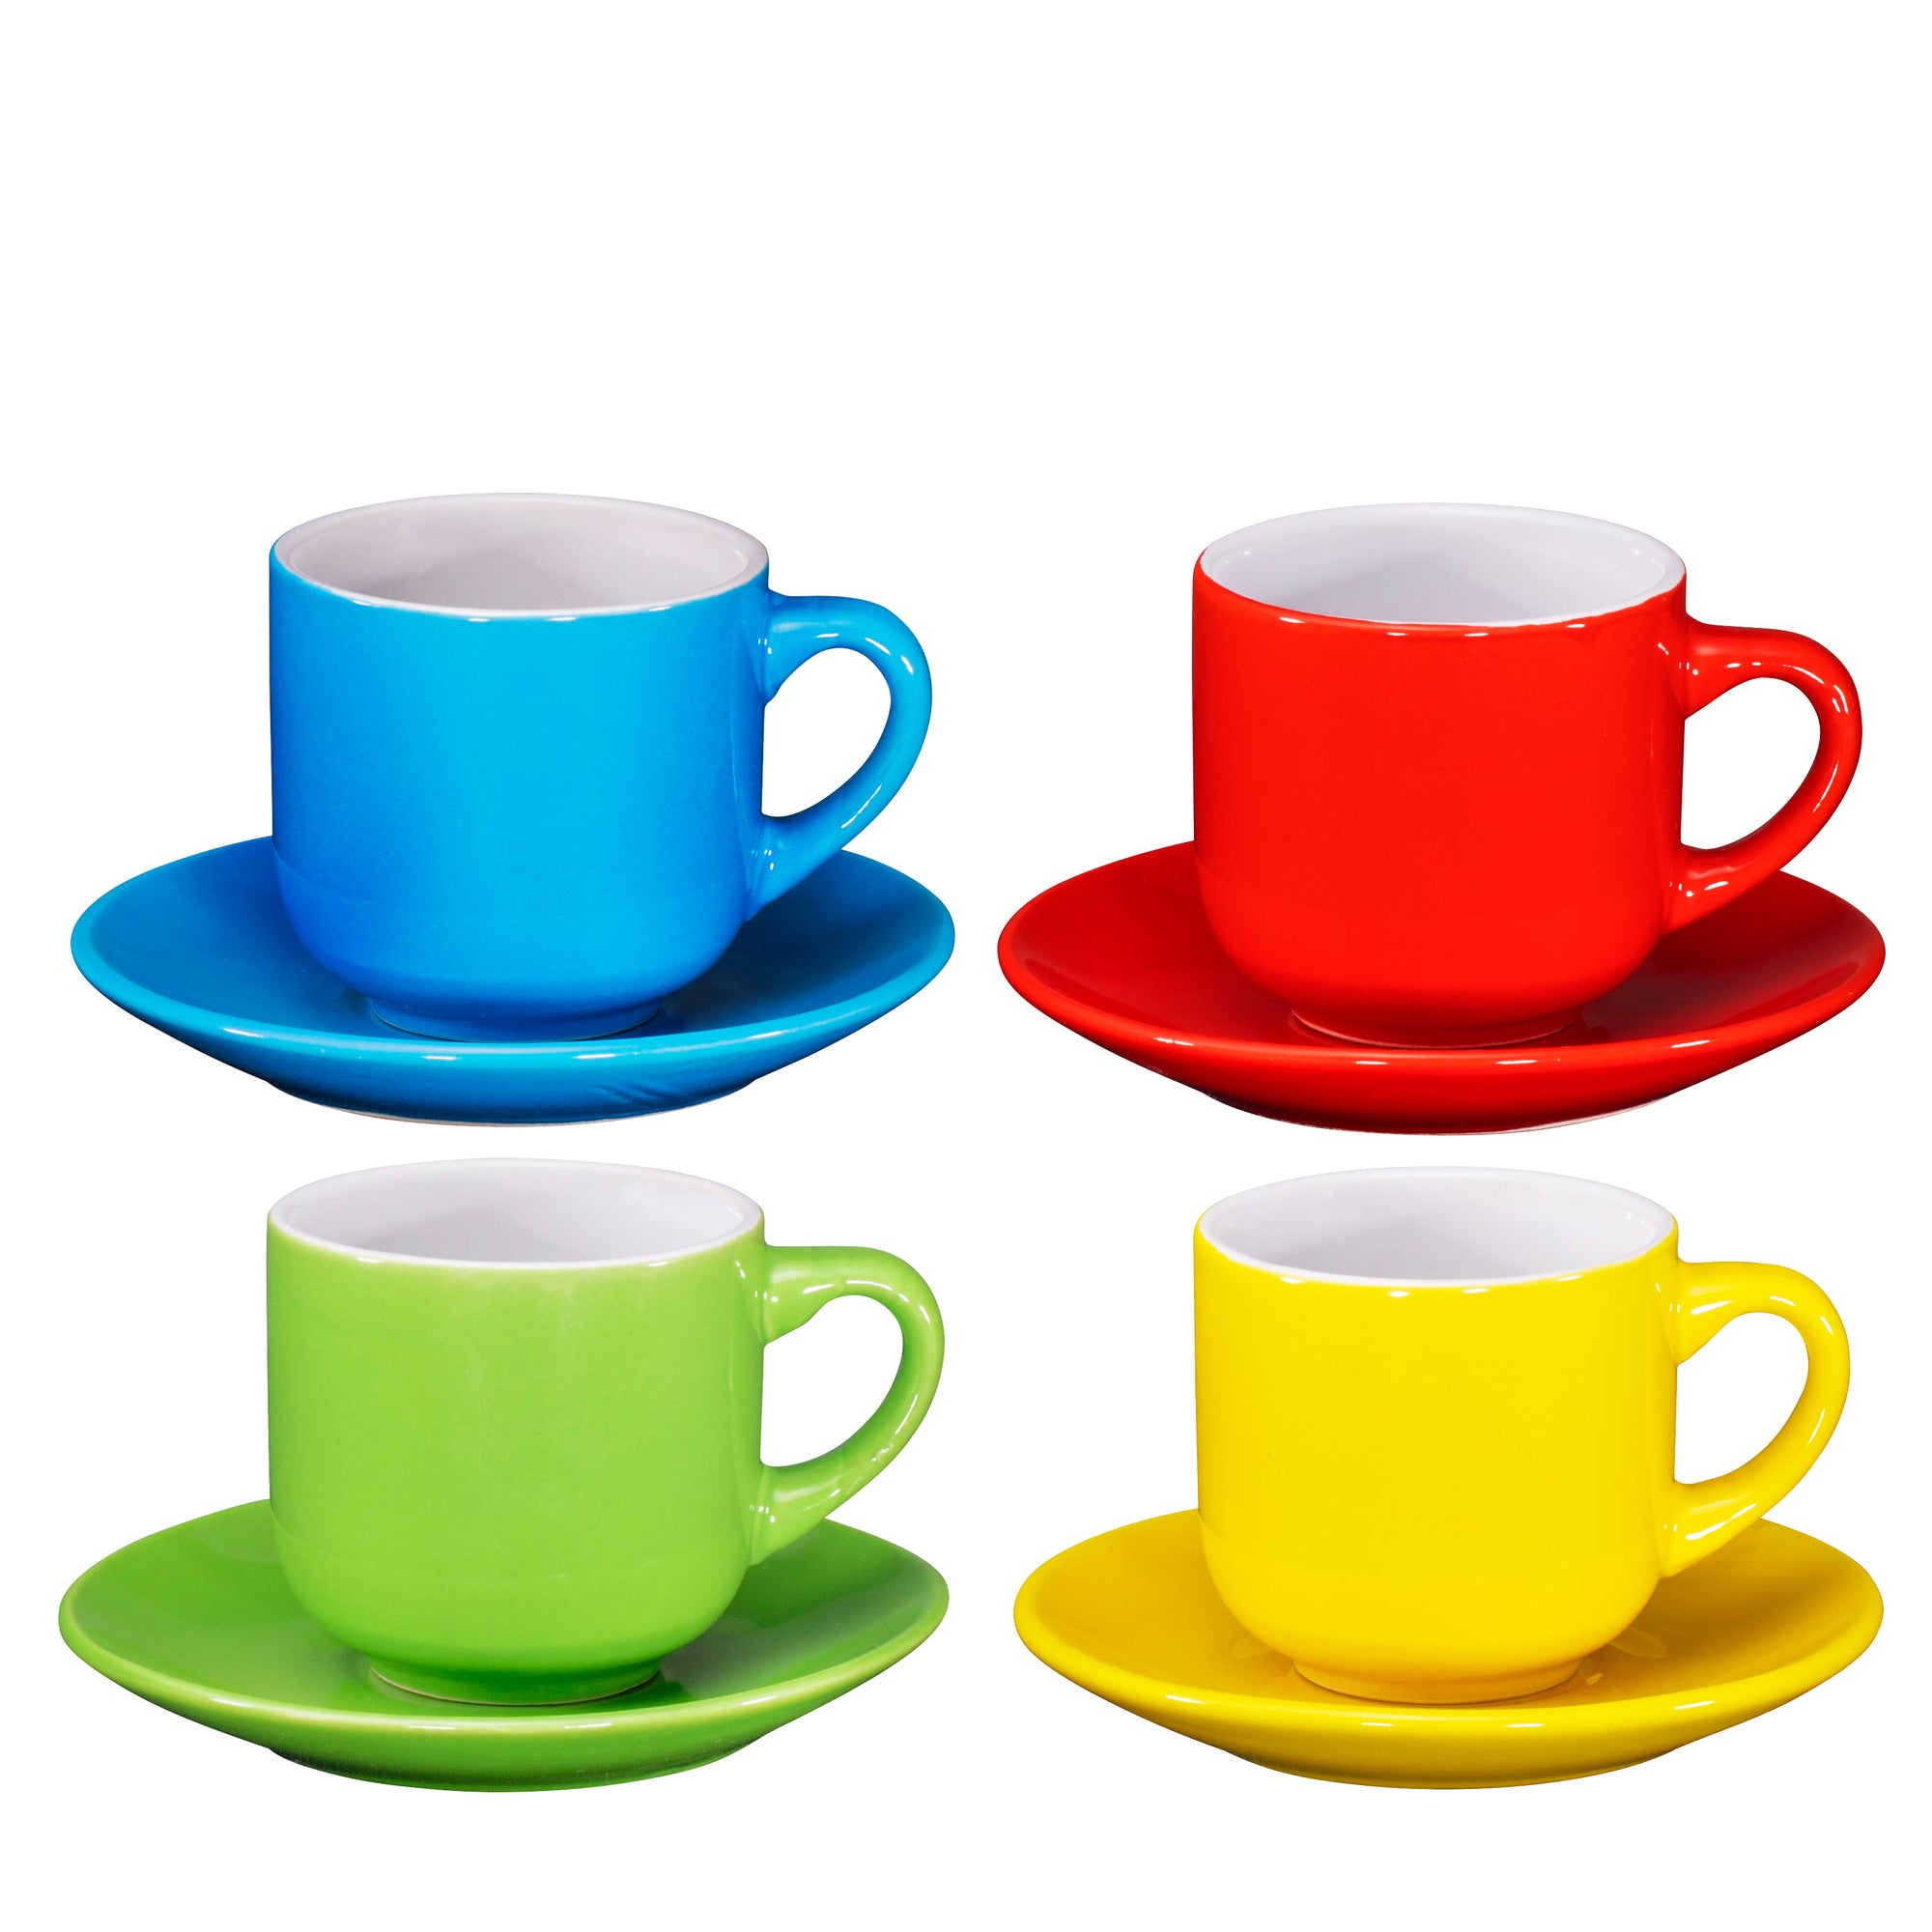 Espresso coffee Cups with Saucers by Bruntmor - 4 ounce - Set of 4